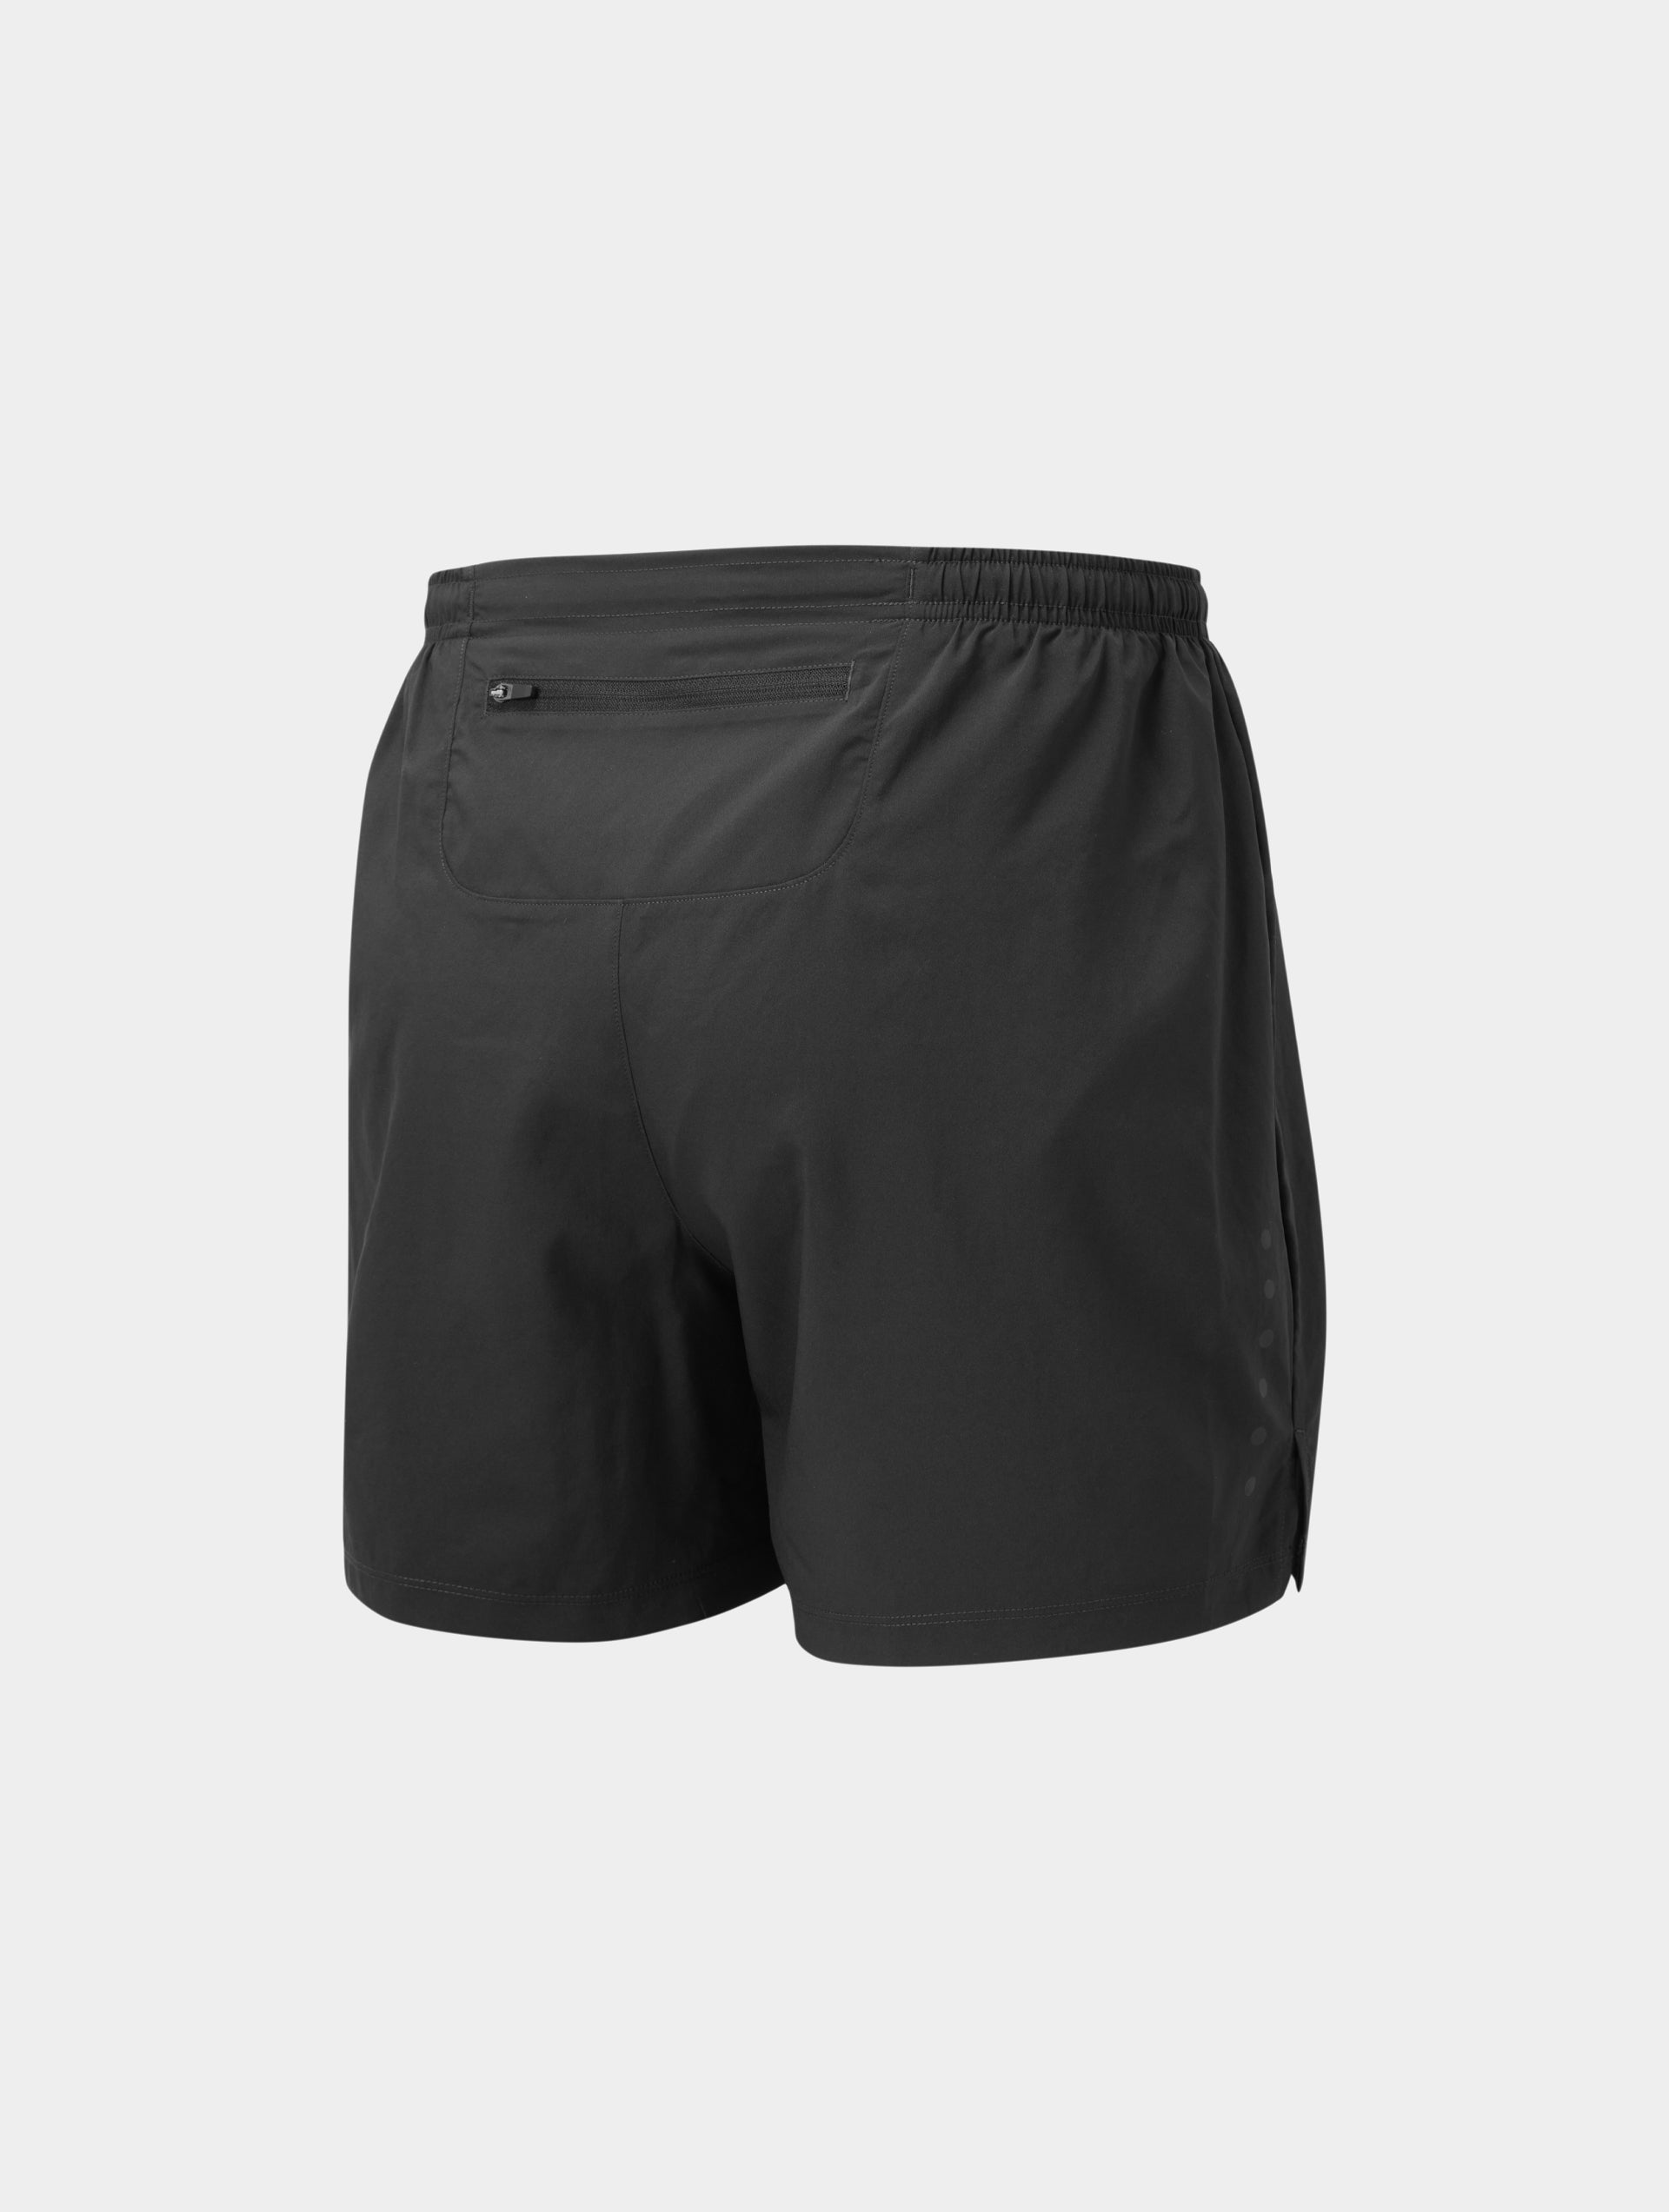 Little Black 5 Fitted Run Shorts